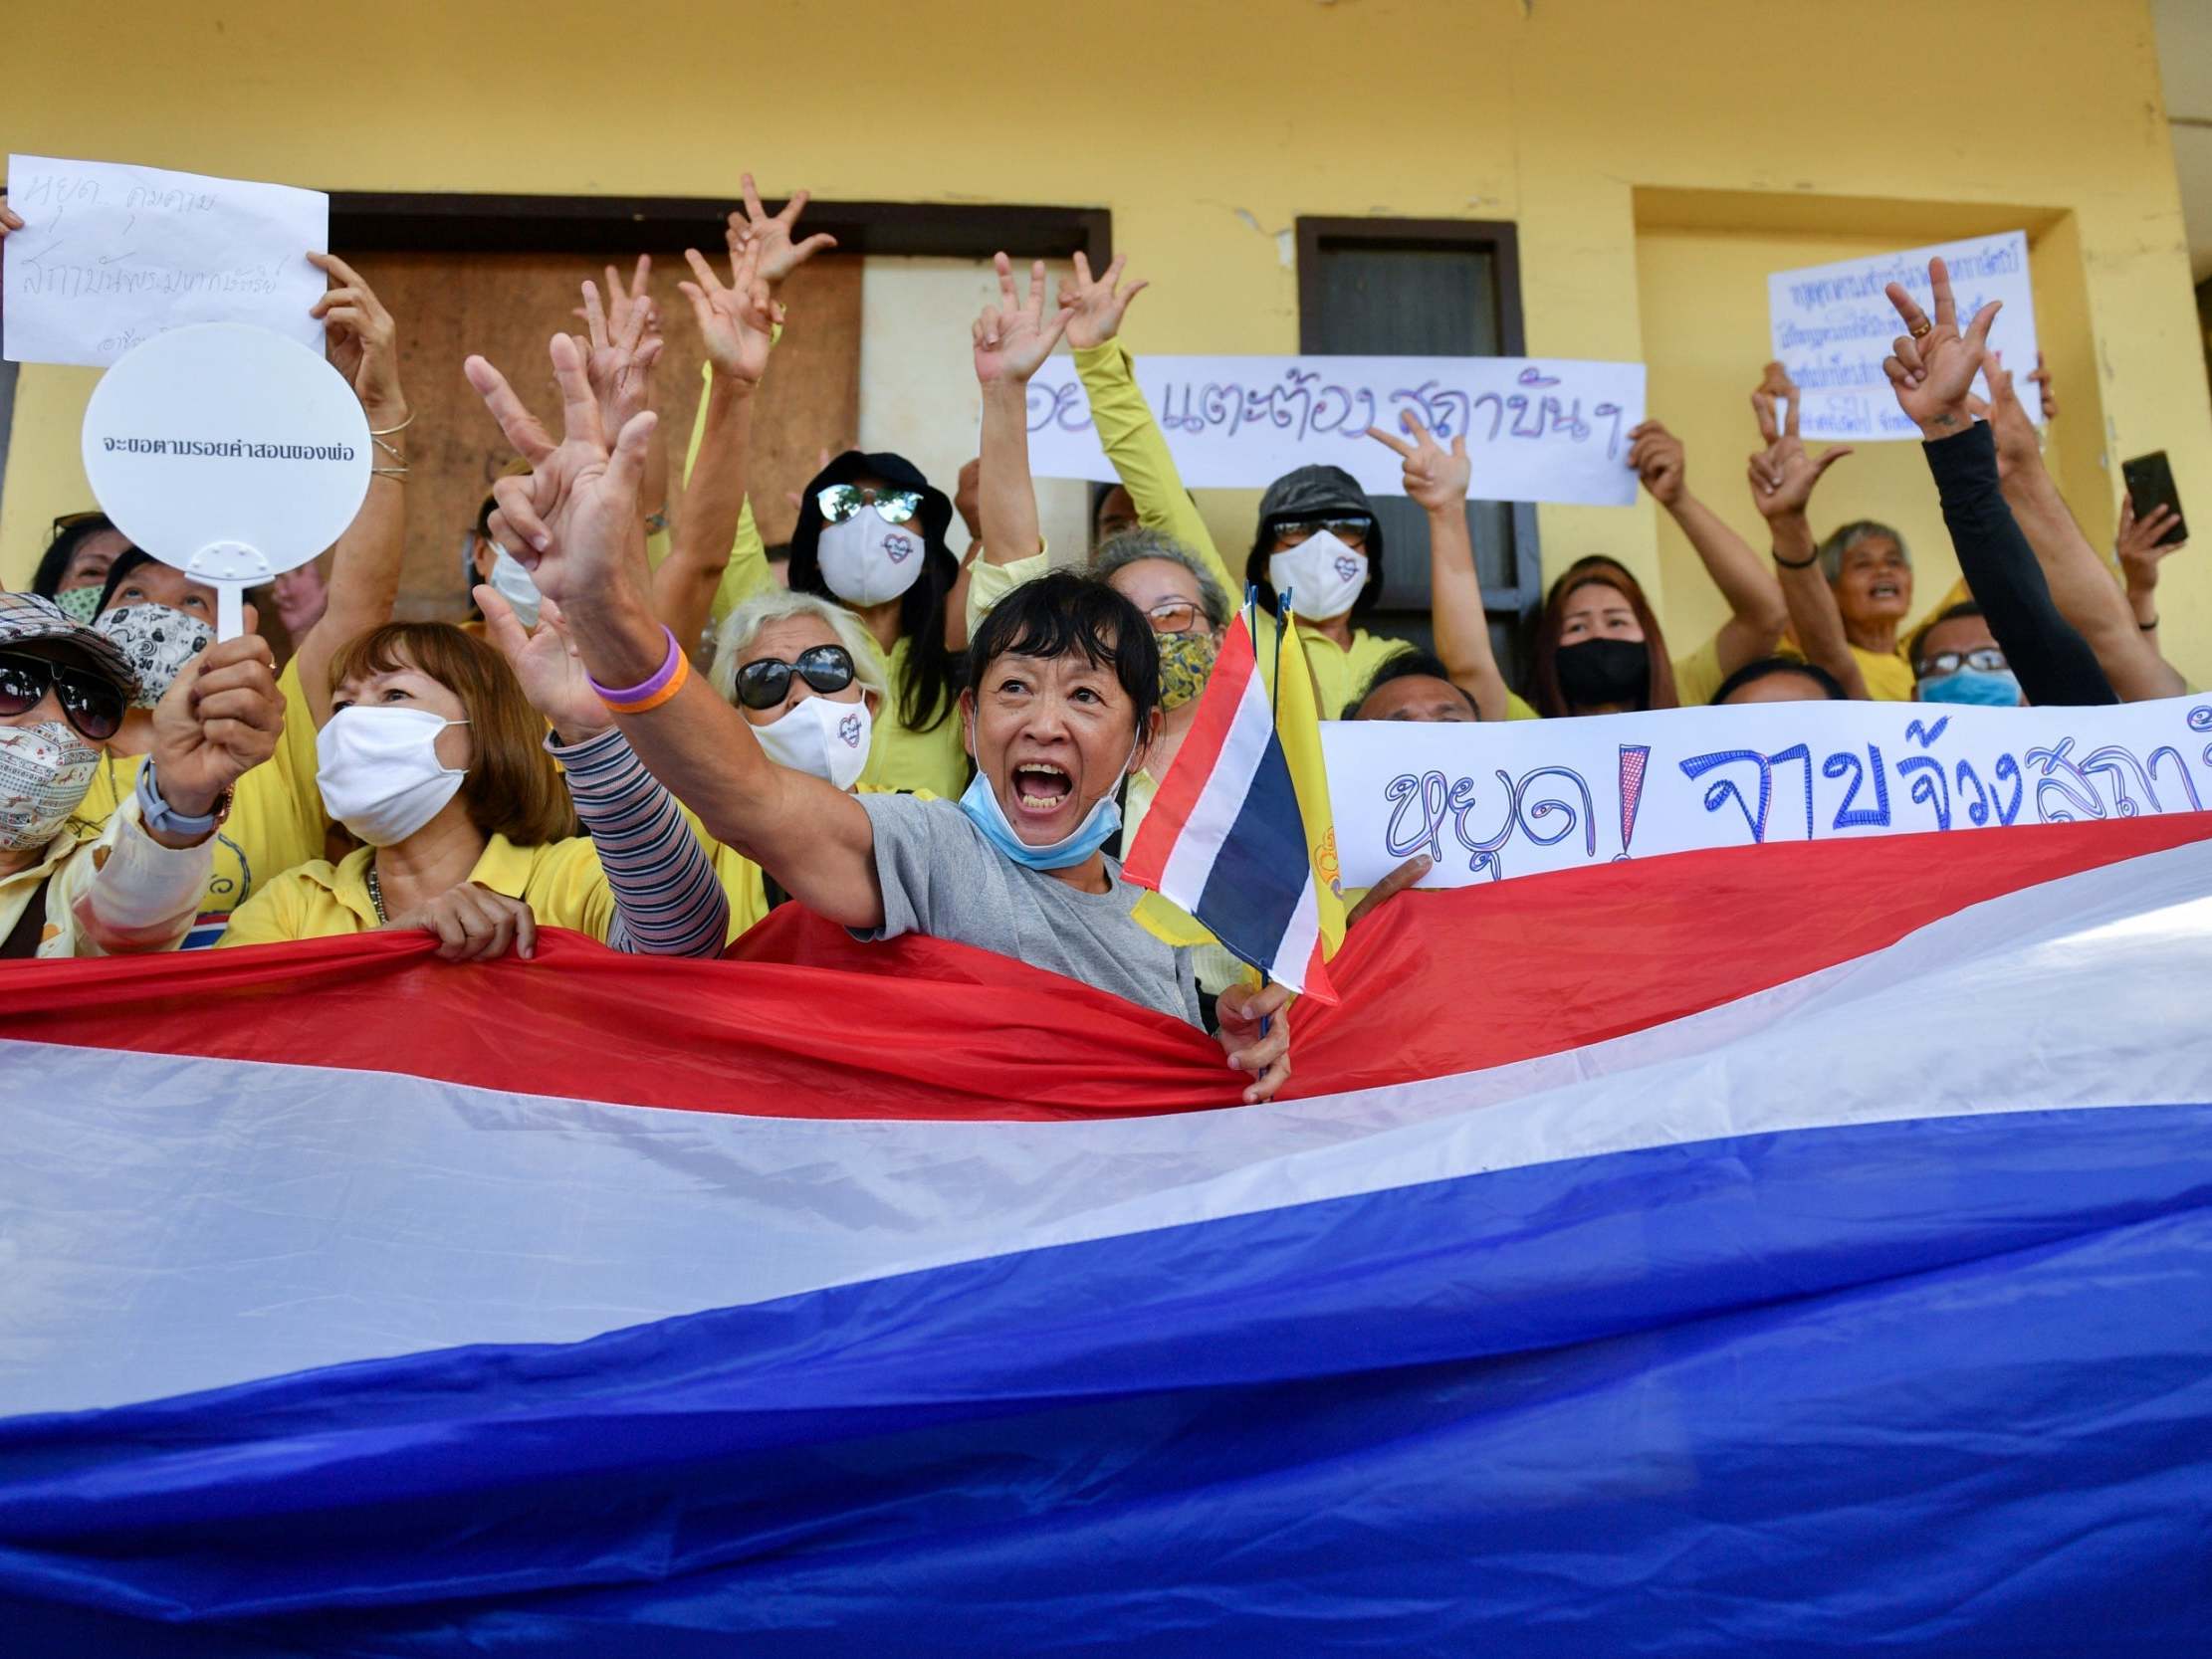 Pro-royalist supporters wearing yellow shirts wave a Thai national flag attend a rally to show their support for the monarchy